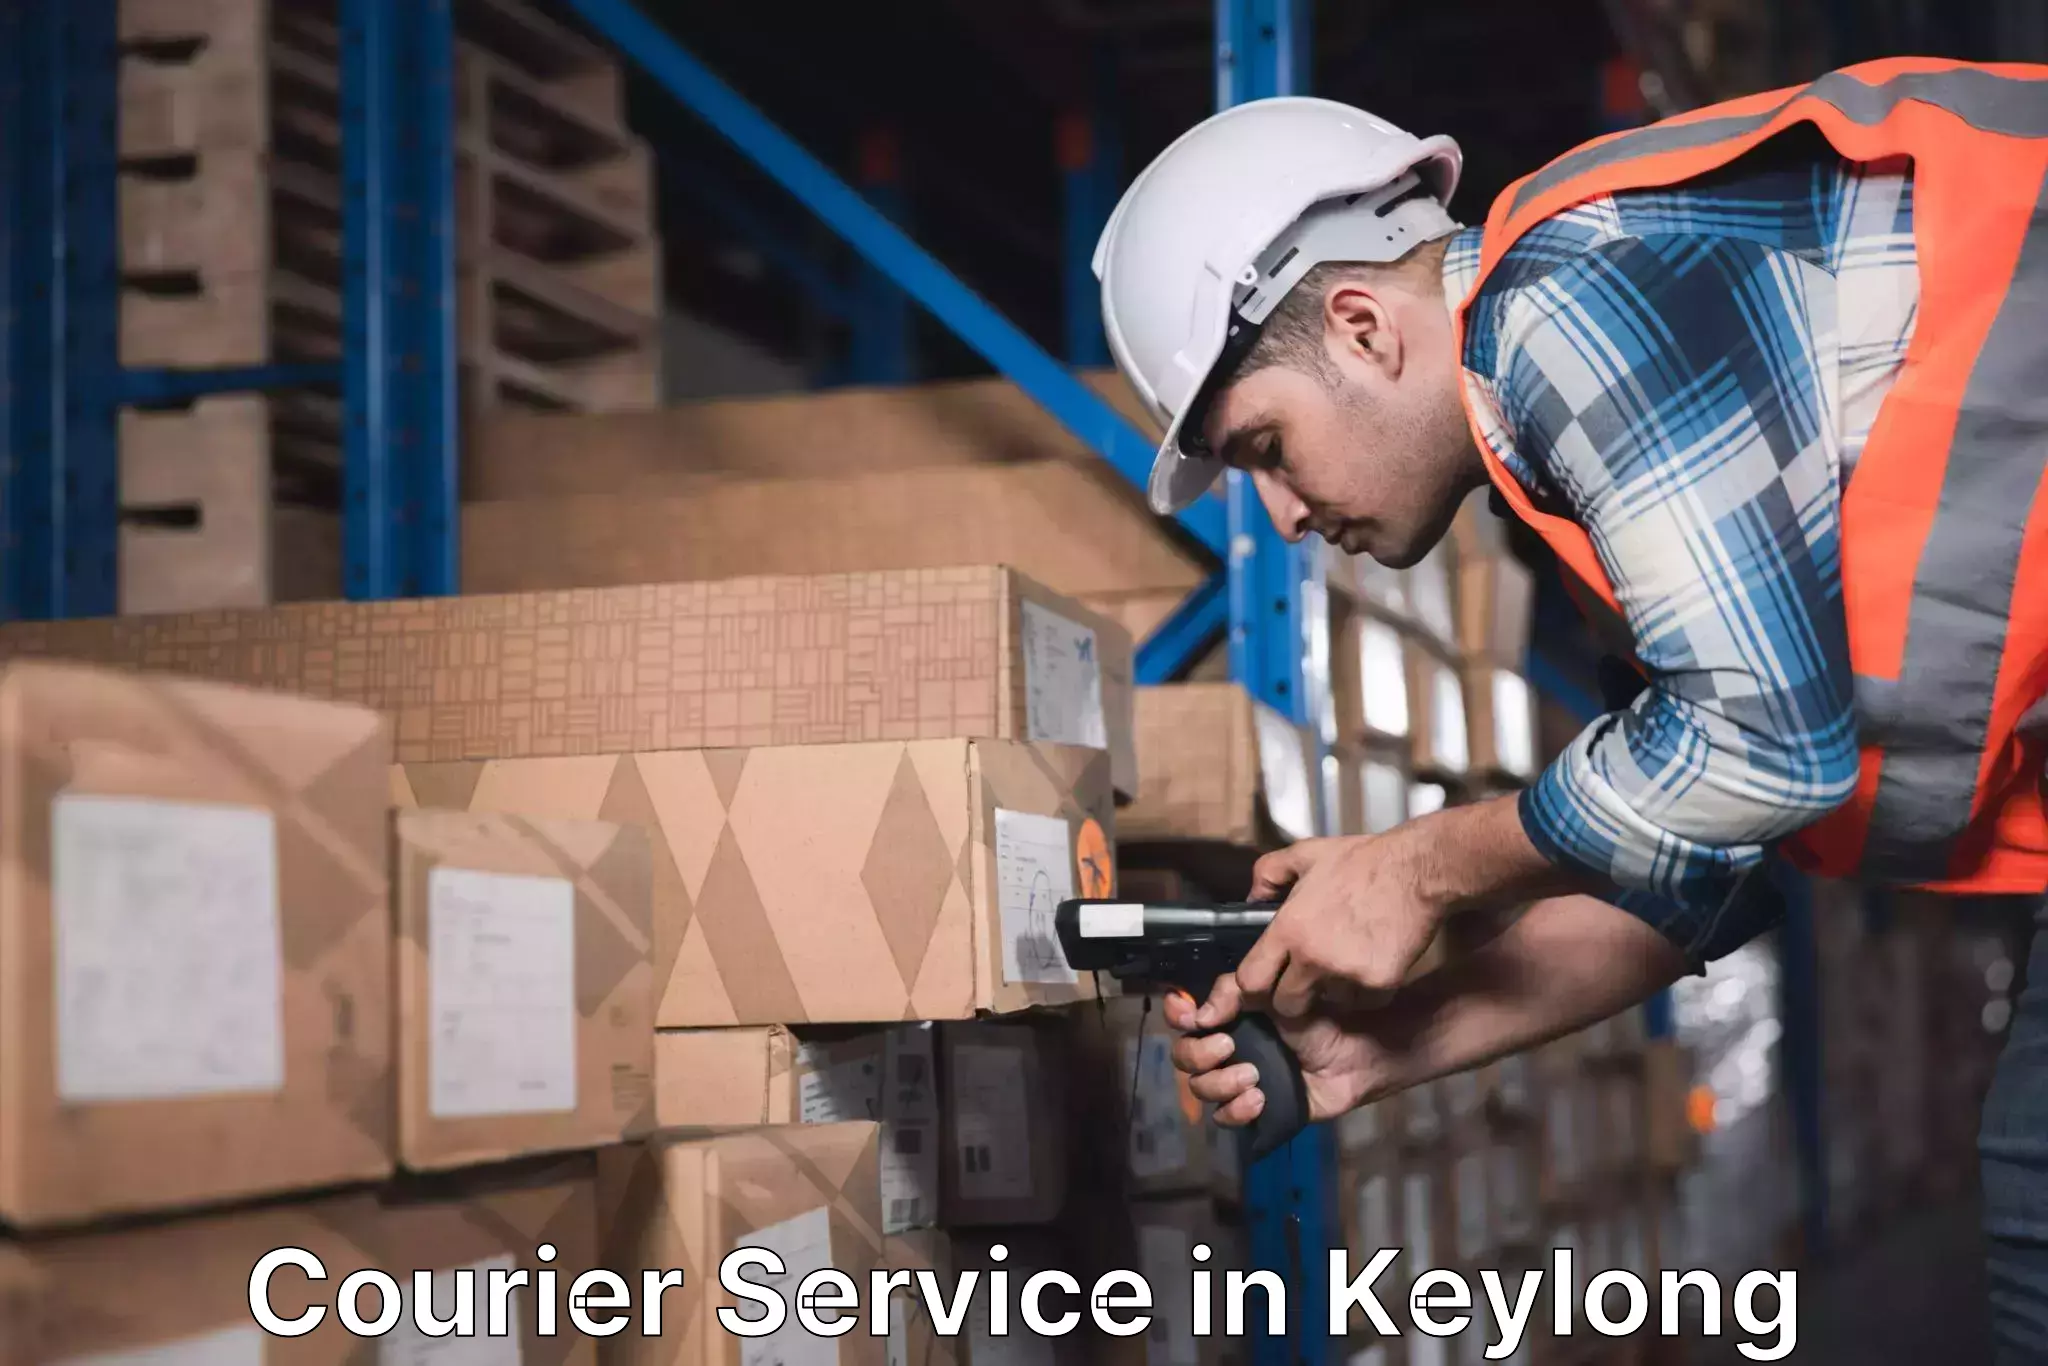 Customer-oriented courier services in Keylong